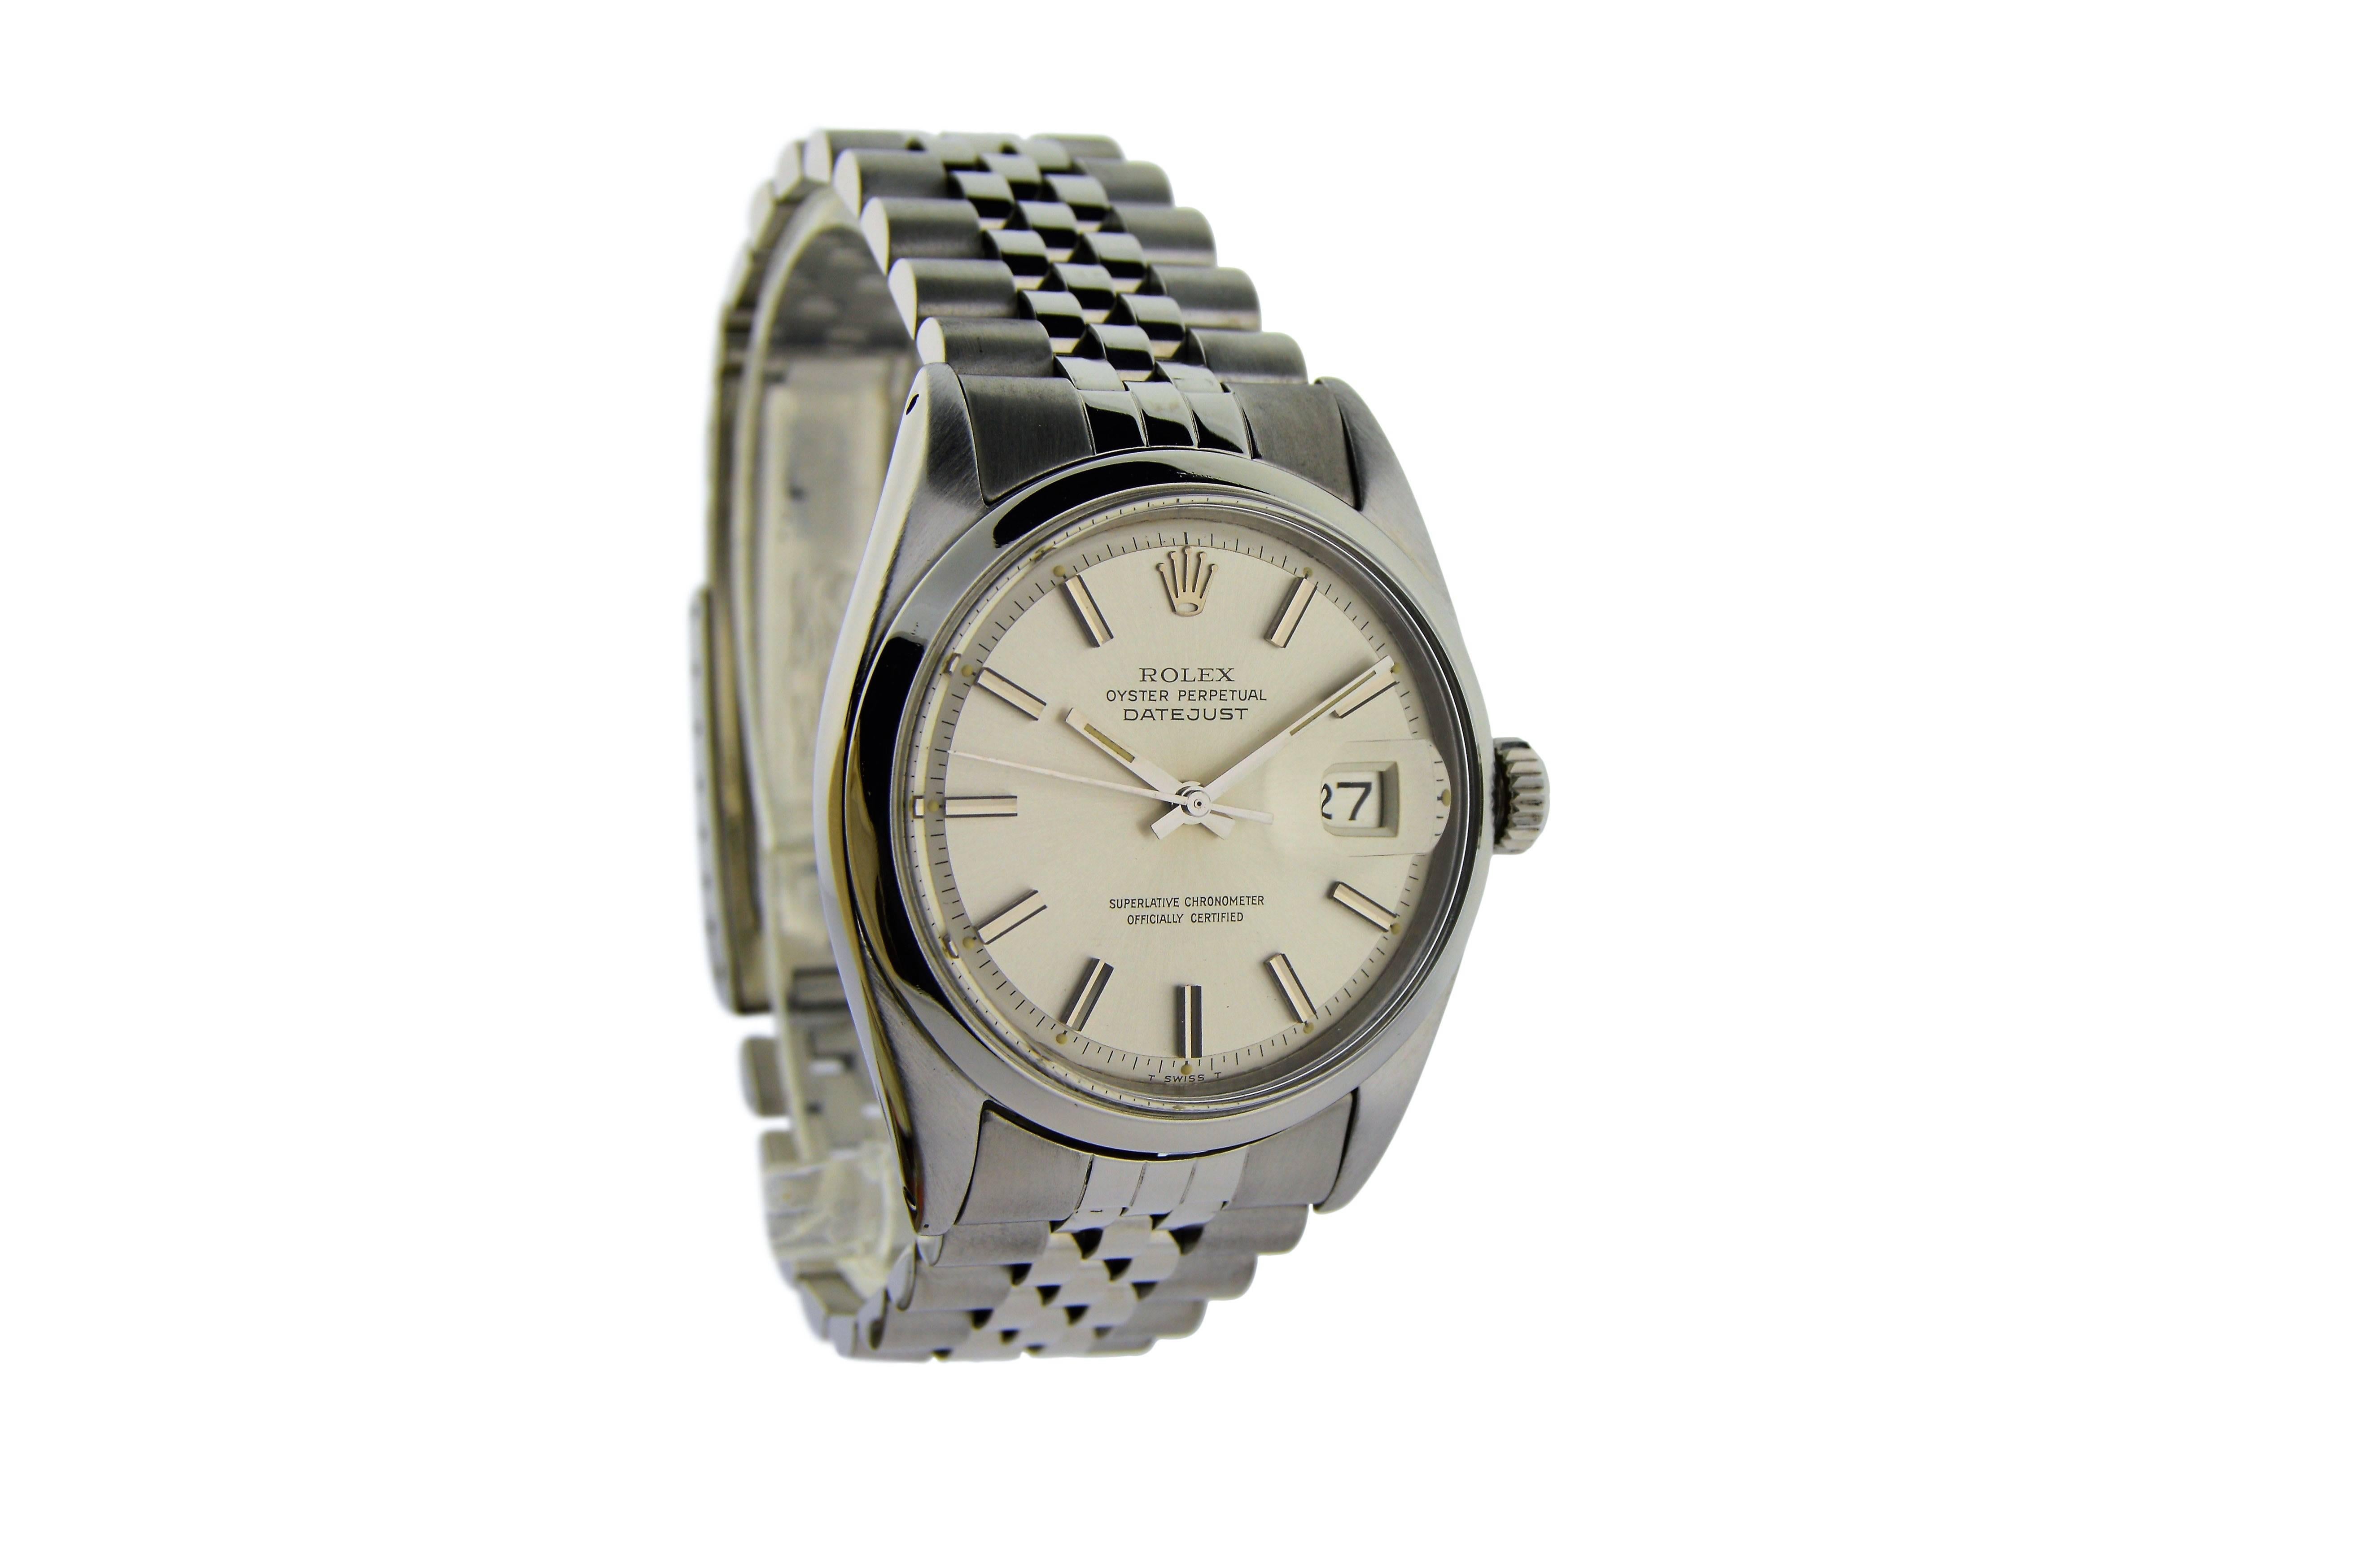 FACTORY / HOUSE: Rolex Watch Company
STYLE / REFERENCE: Oyster Perpetual Datejust / Ref. 1603
METAL / MATERIAL: Stainless Steel 
DIMENSIONS:  44mm  X  36mm
CIRCA: 1968/69
MOVEMENT / CALIBER: Perpetual / 1570
DIAL / HANDS: Original Silvered w/ Batons